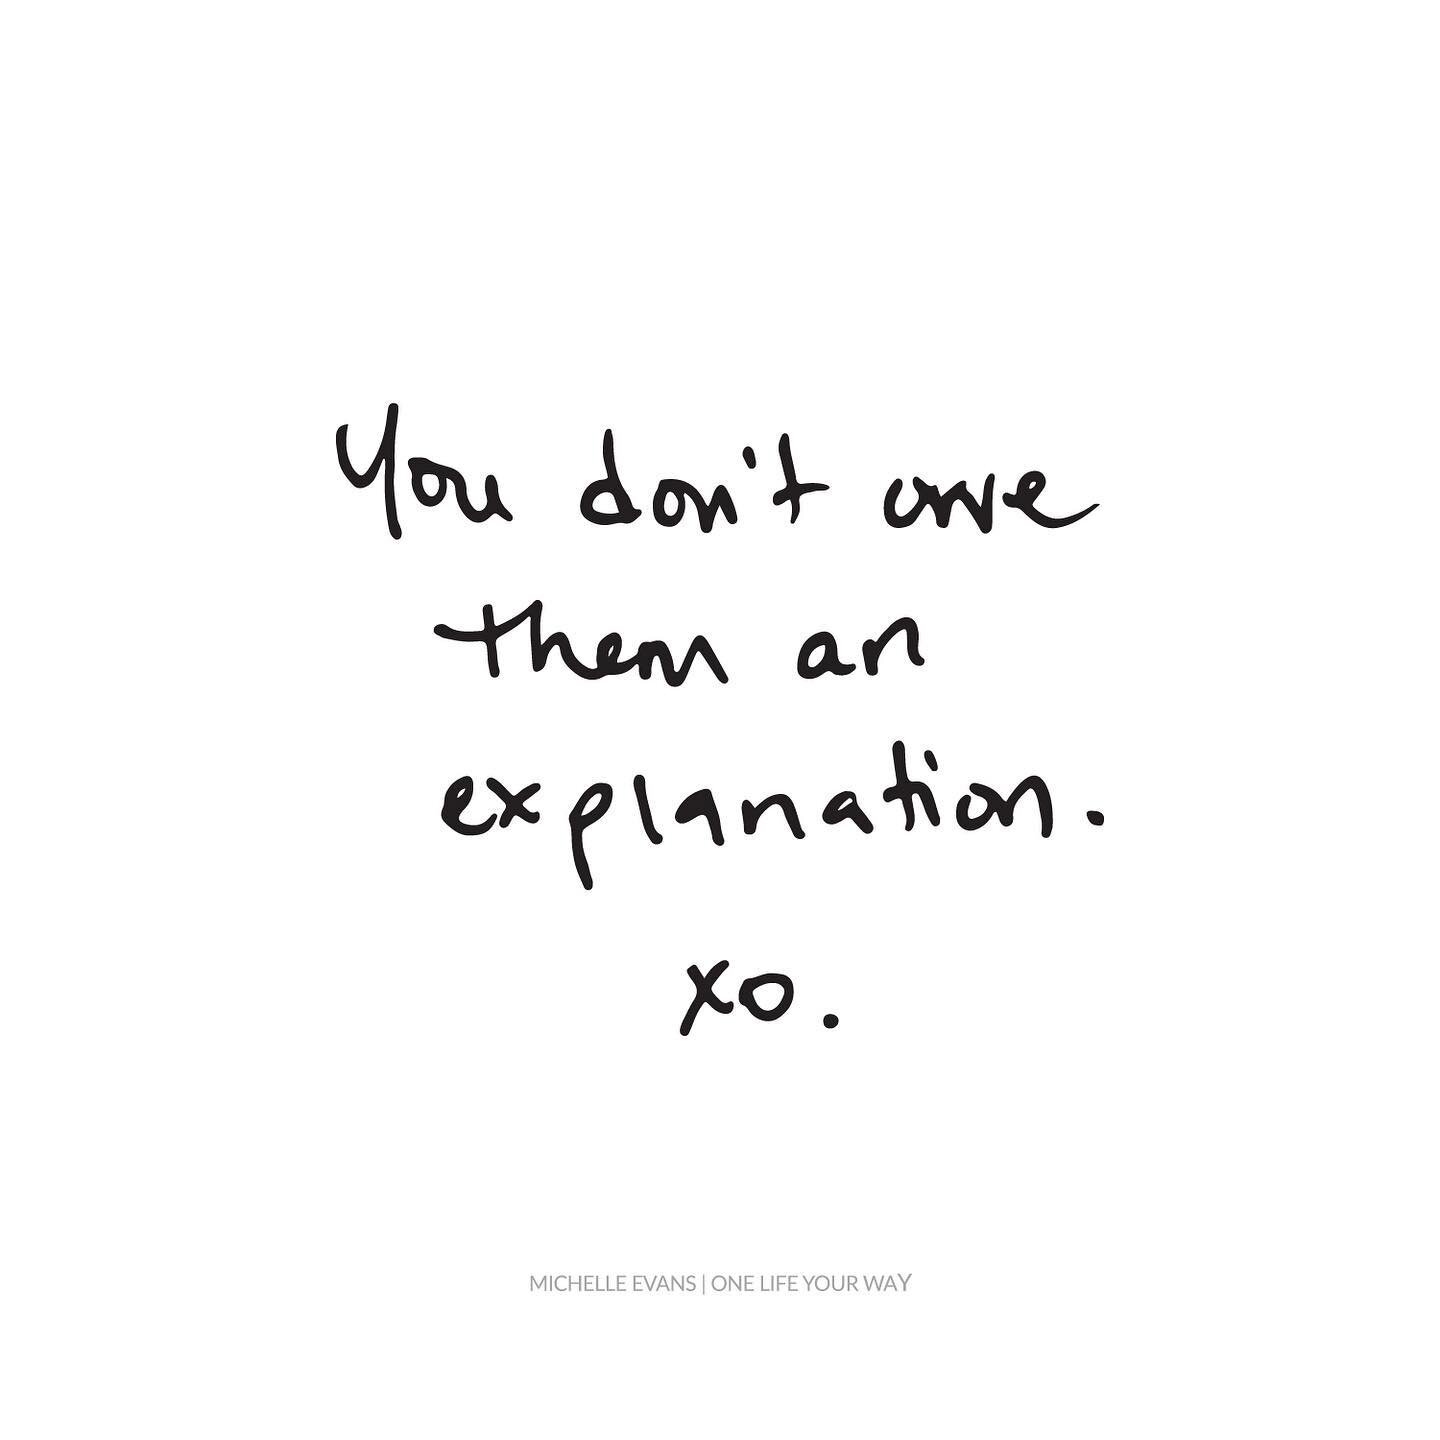 Unless you are married to them, unless they are paying your bills, unless they are raising your babies, you don&rsquo;t owe them an explanation. 

#selfworth #selfcare #selfcaresunday #mindset #confidence #protectyourpeace #conflict #toxicrelationshi